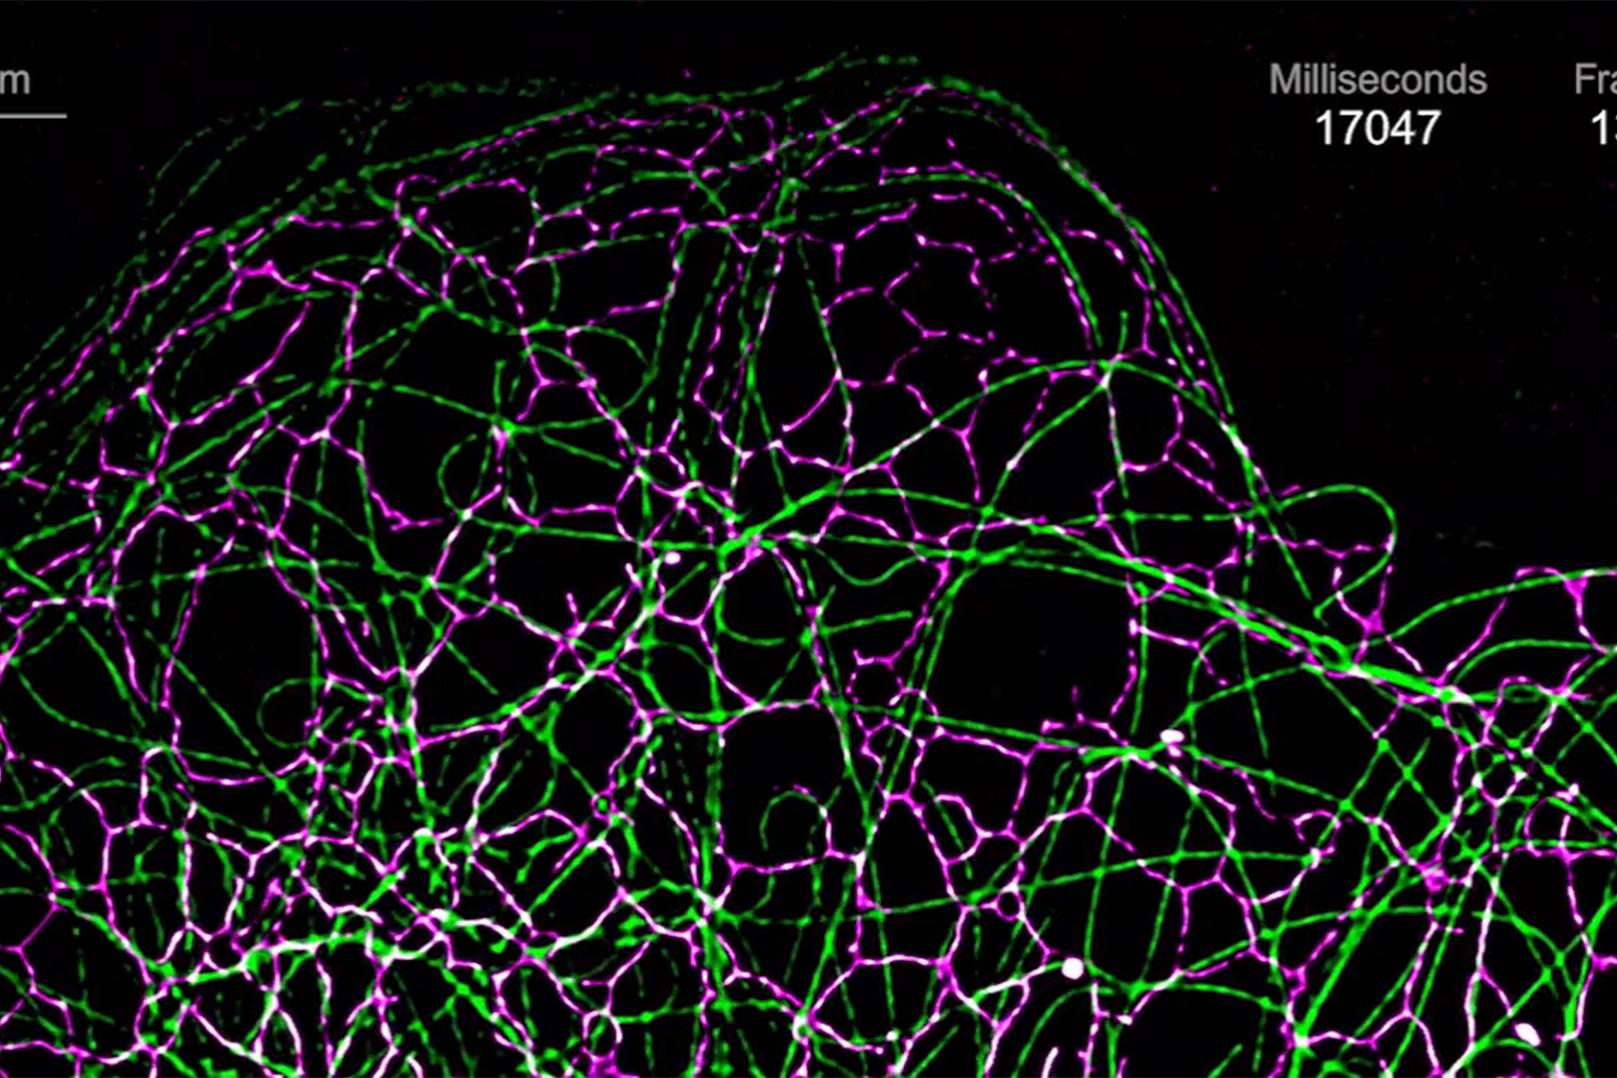 Simultaneous imaging of the endoplasmic reticulum (Calreticulin-tdTomato, magenta) and microtubules (EMTB-3xGFP, green) in a Cos-7 cell reveals highly dynamic interaction of these organelles. Objective: Plan-Apochromat 63× / 1.4 Oil